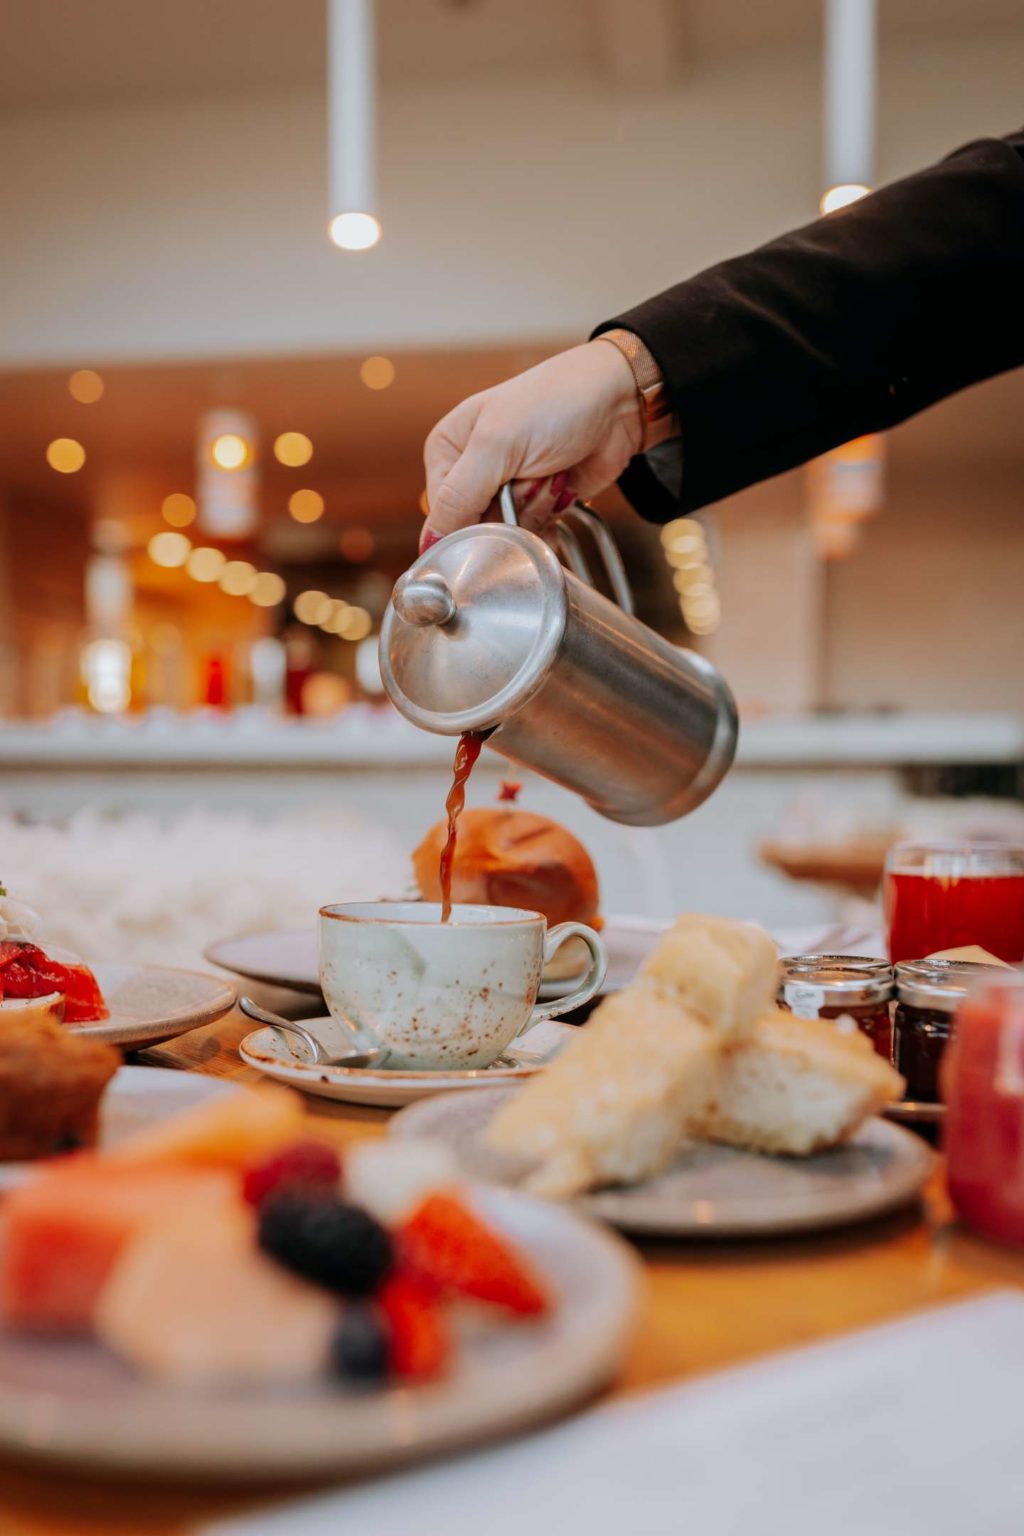 Pouring a pot of tea at The Terrace Restaurant and Bar during breakfast